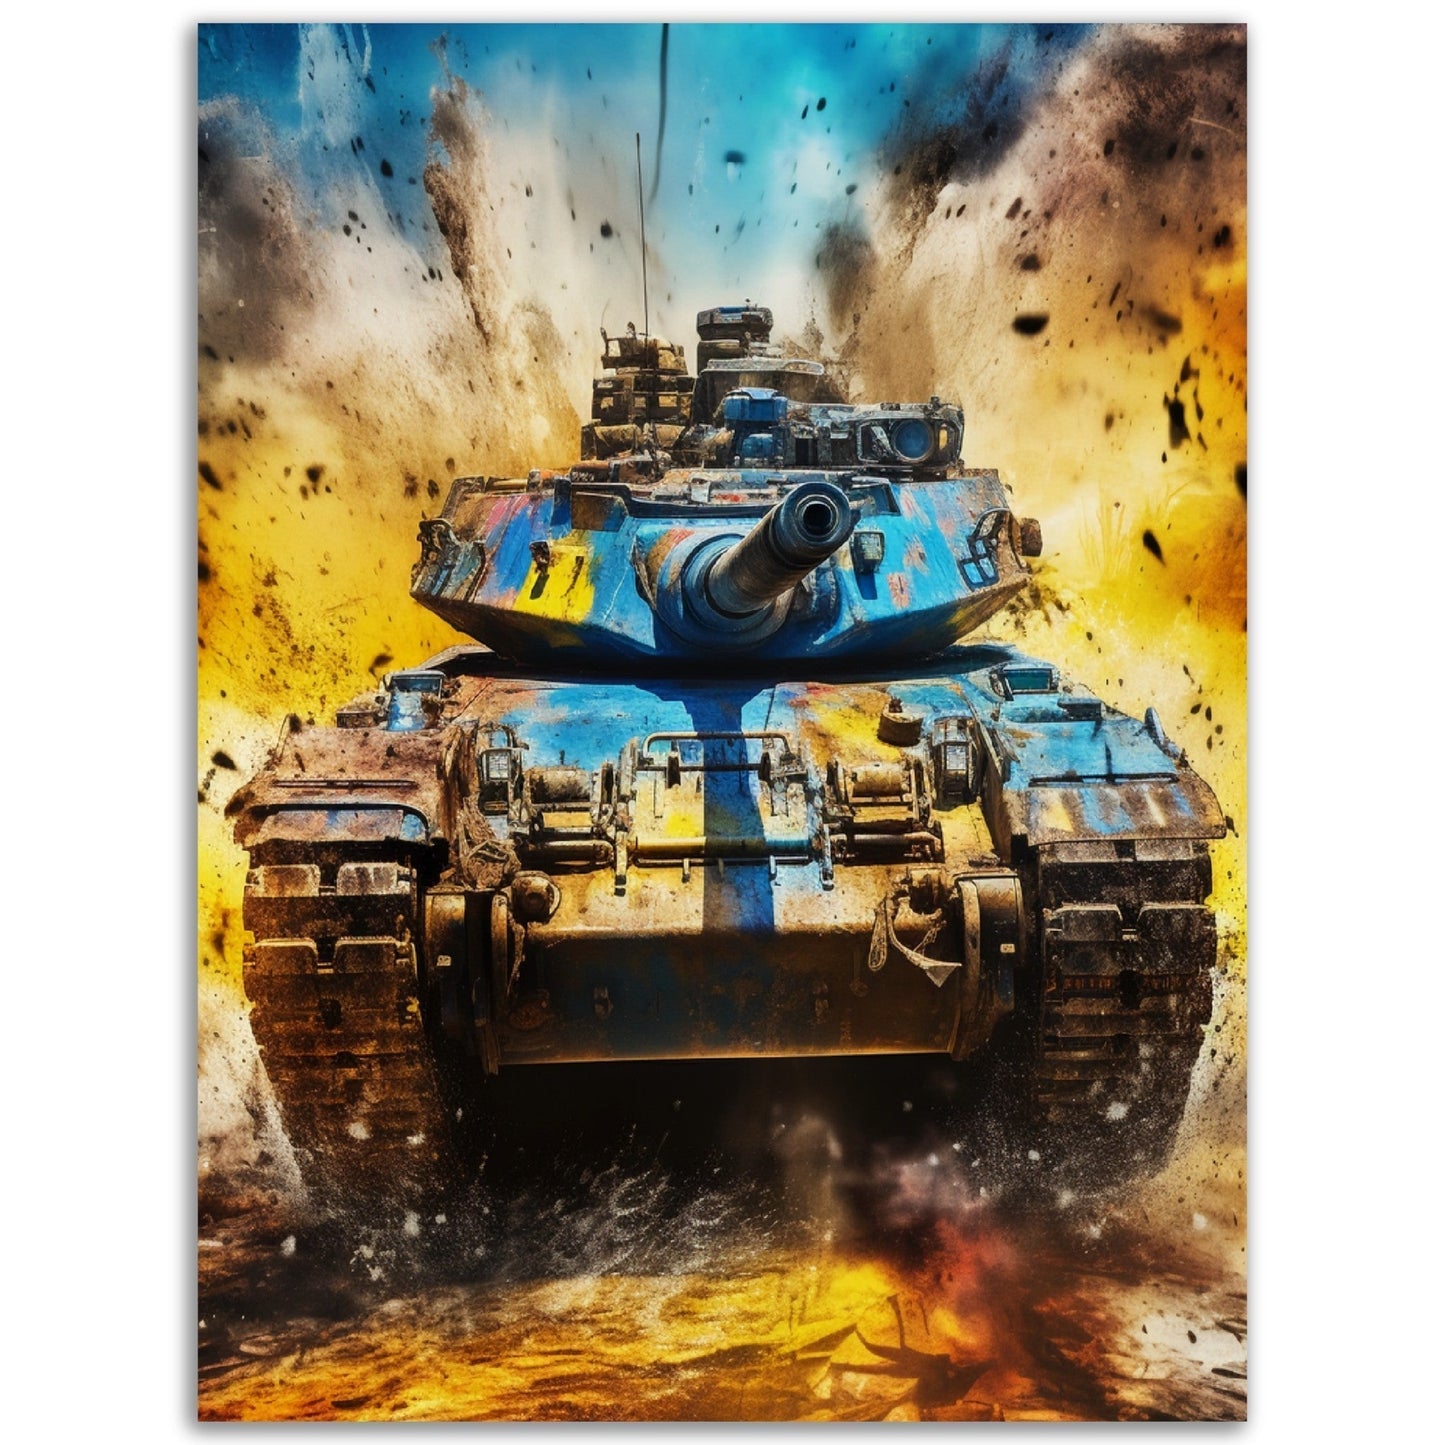 High Quality Colored Wall Art depicting Victory With Ukraine amidst raging flames, perfect for decorating rooms.